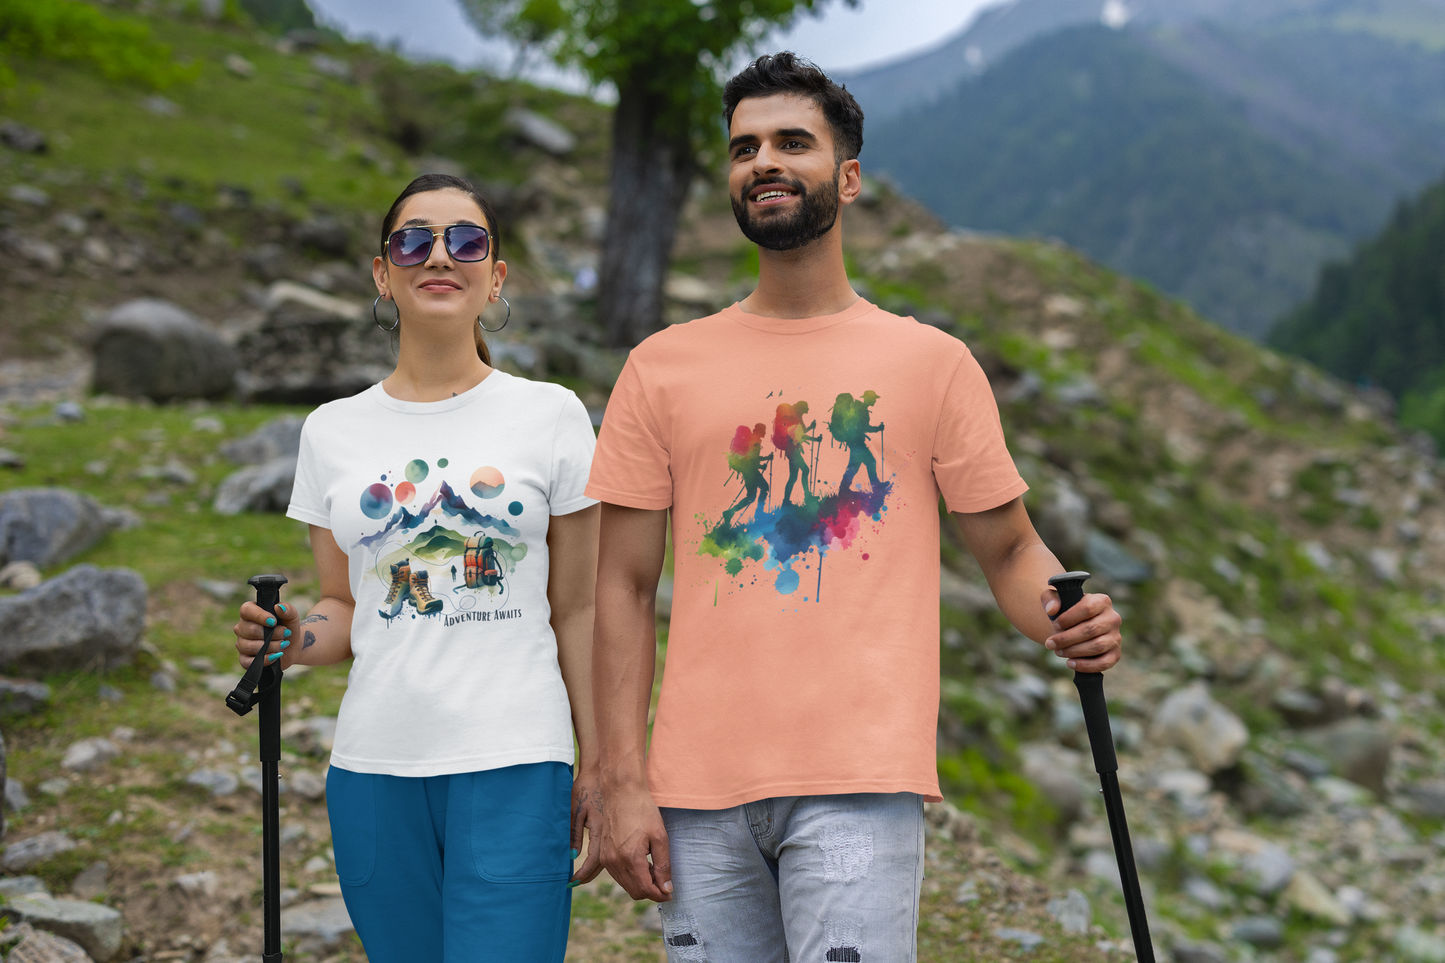 Hiking Shirt for Camping Group, Outdoor Gift for Hiking Group Adventure Lover